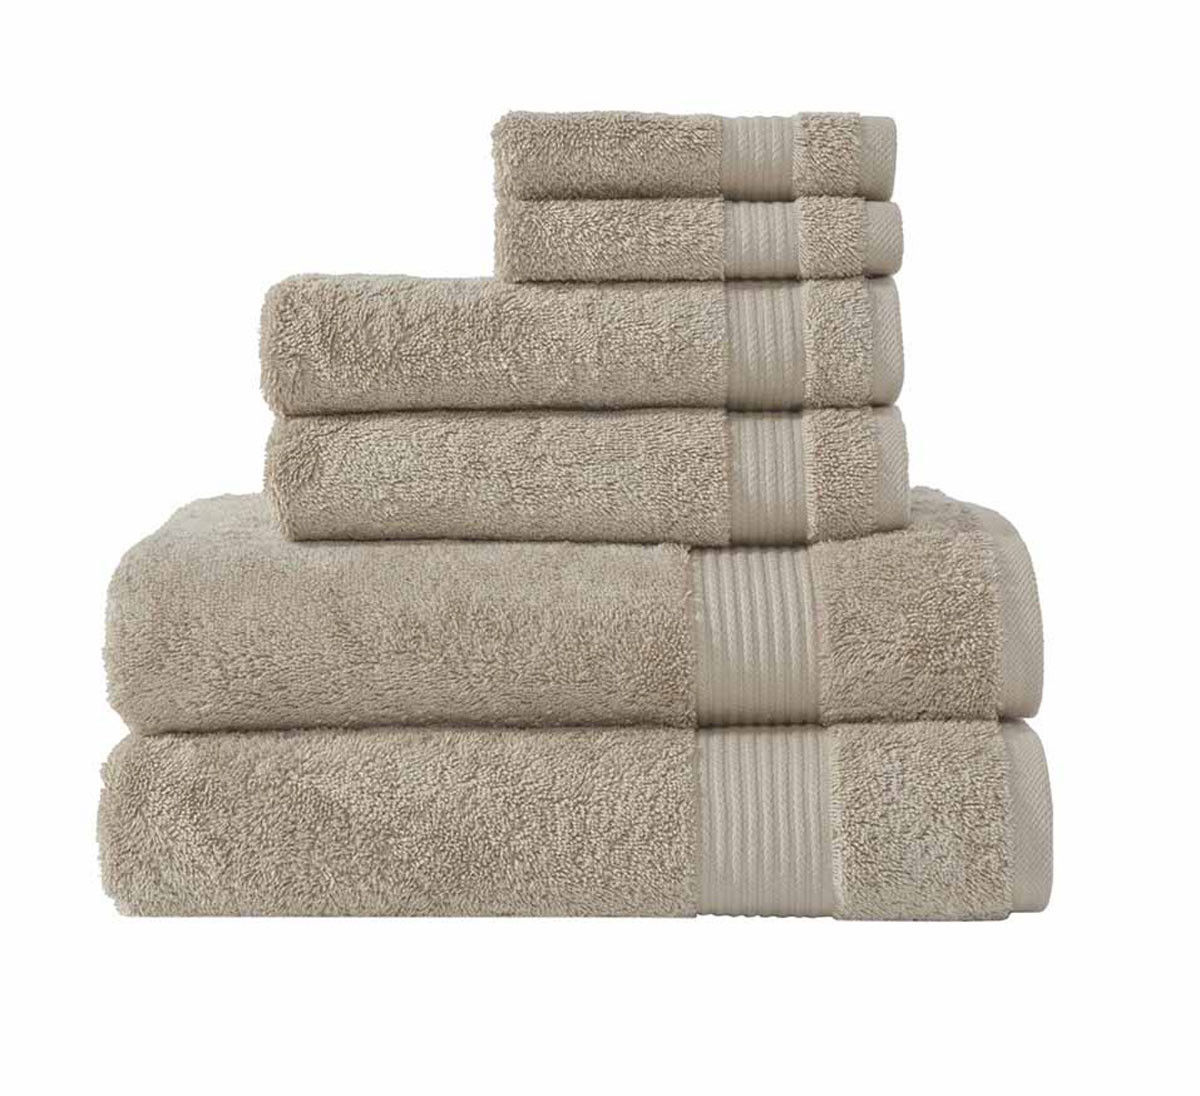 What is the color of the brown towels in the Amadeus Turkish Brown Rice Towel Collection?